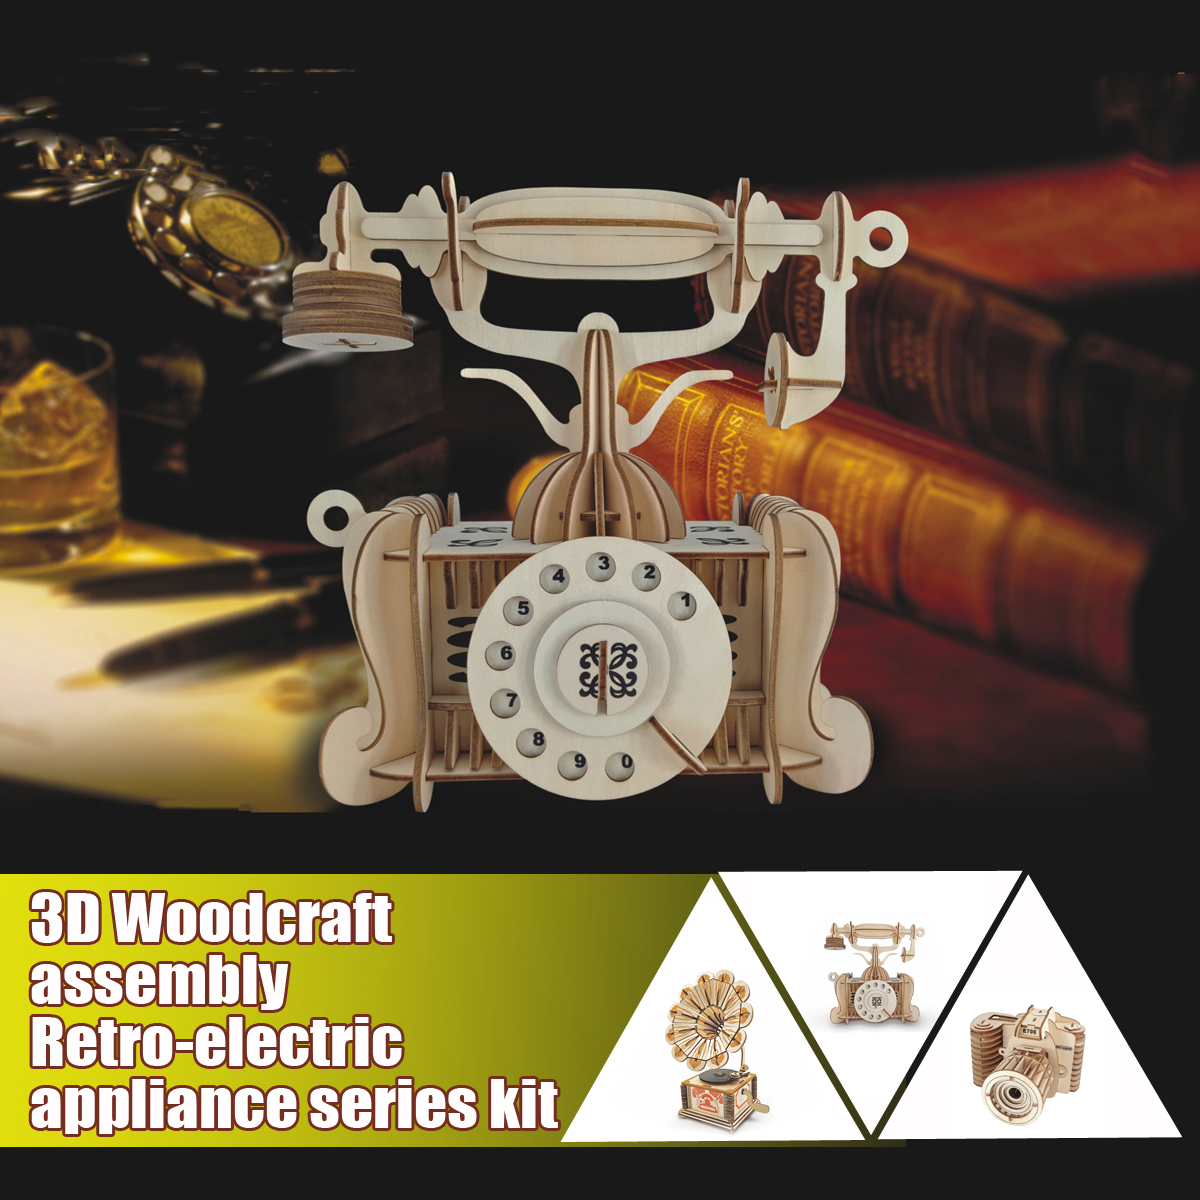 3D-Woodcraft-Assembly-Retro-electric-Appliance-Series-Kit-Jigsaw-Puzzle-Decoration-Toy-Model-for-Kid-1635636-2